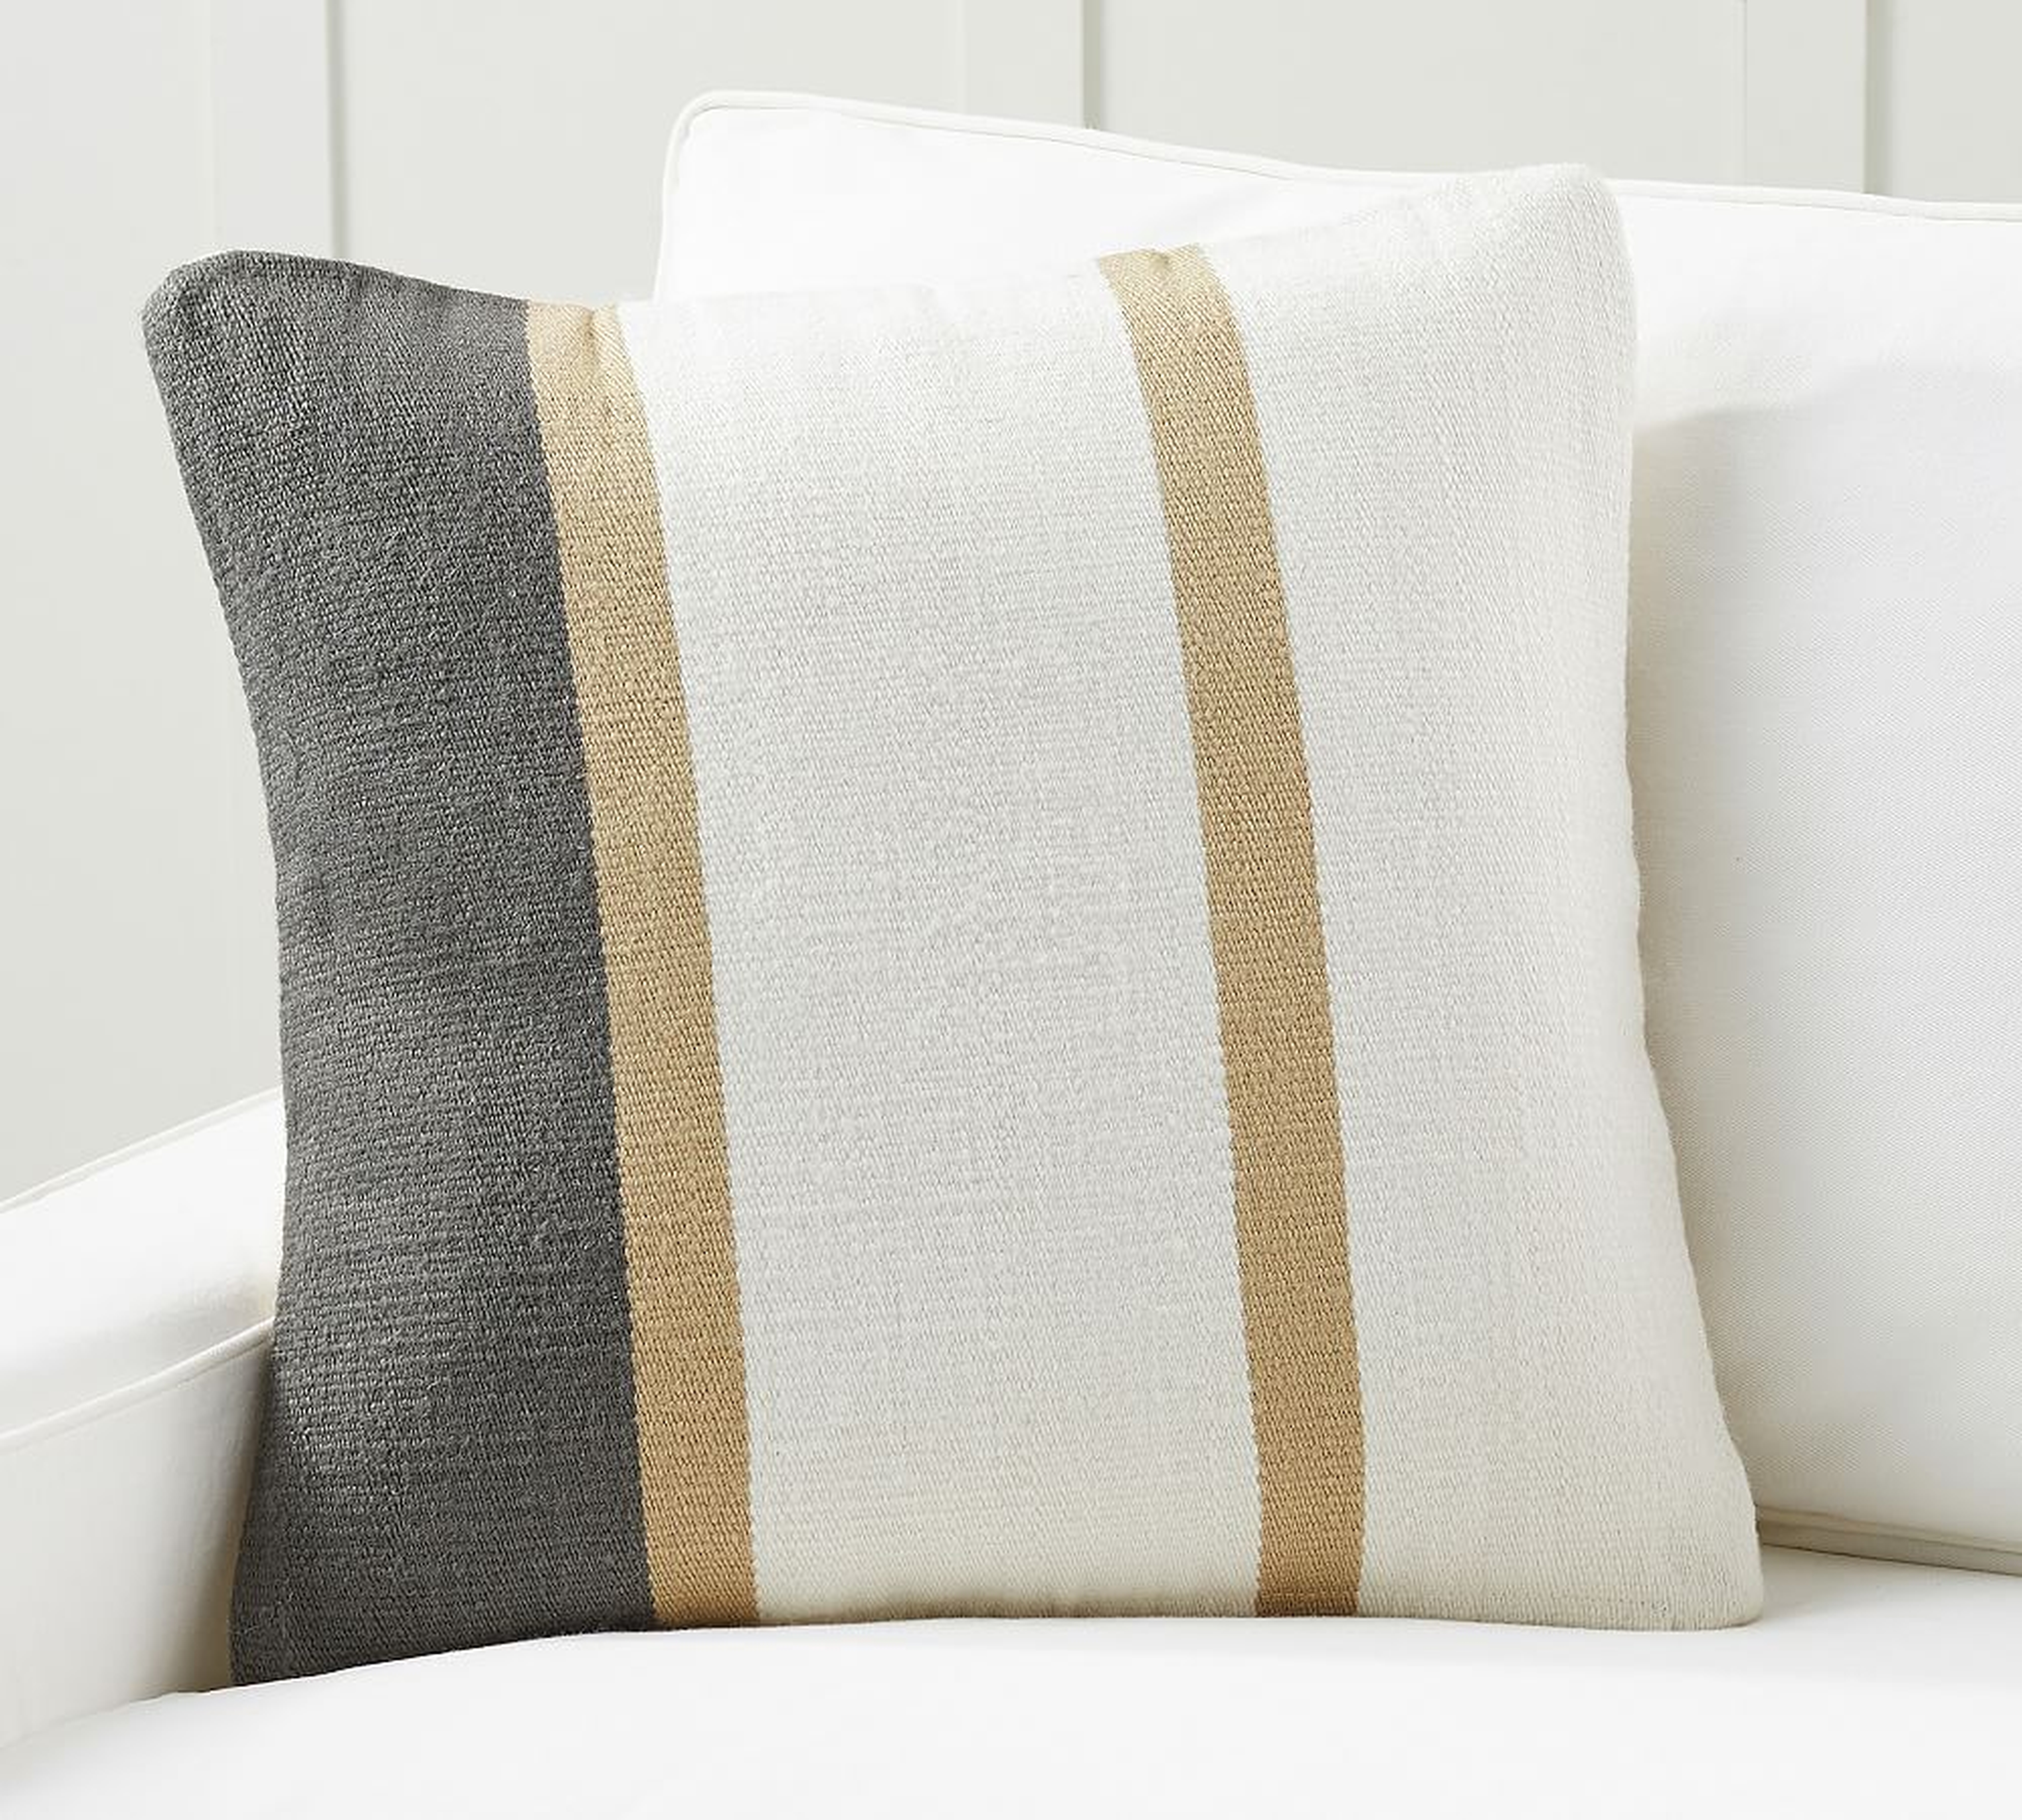 Theo Striped Pillow Cover, 22 x 22", Neutral Multi - Pottery Barn